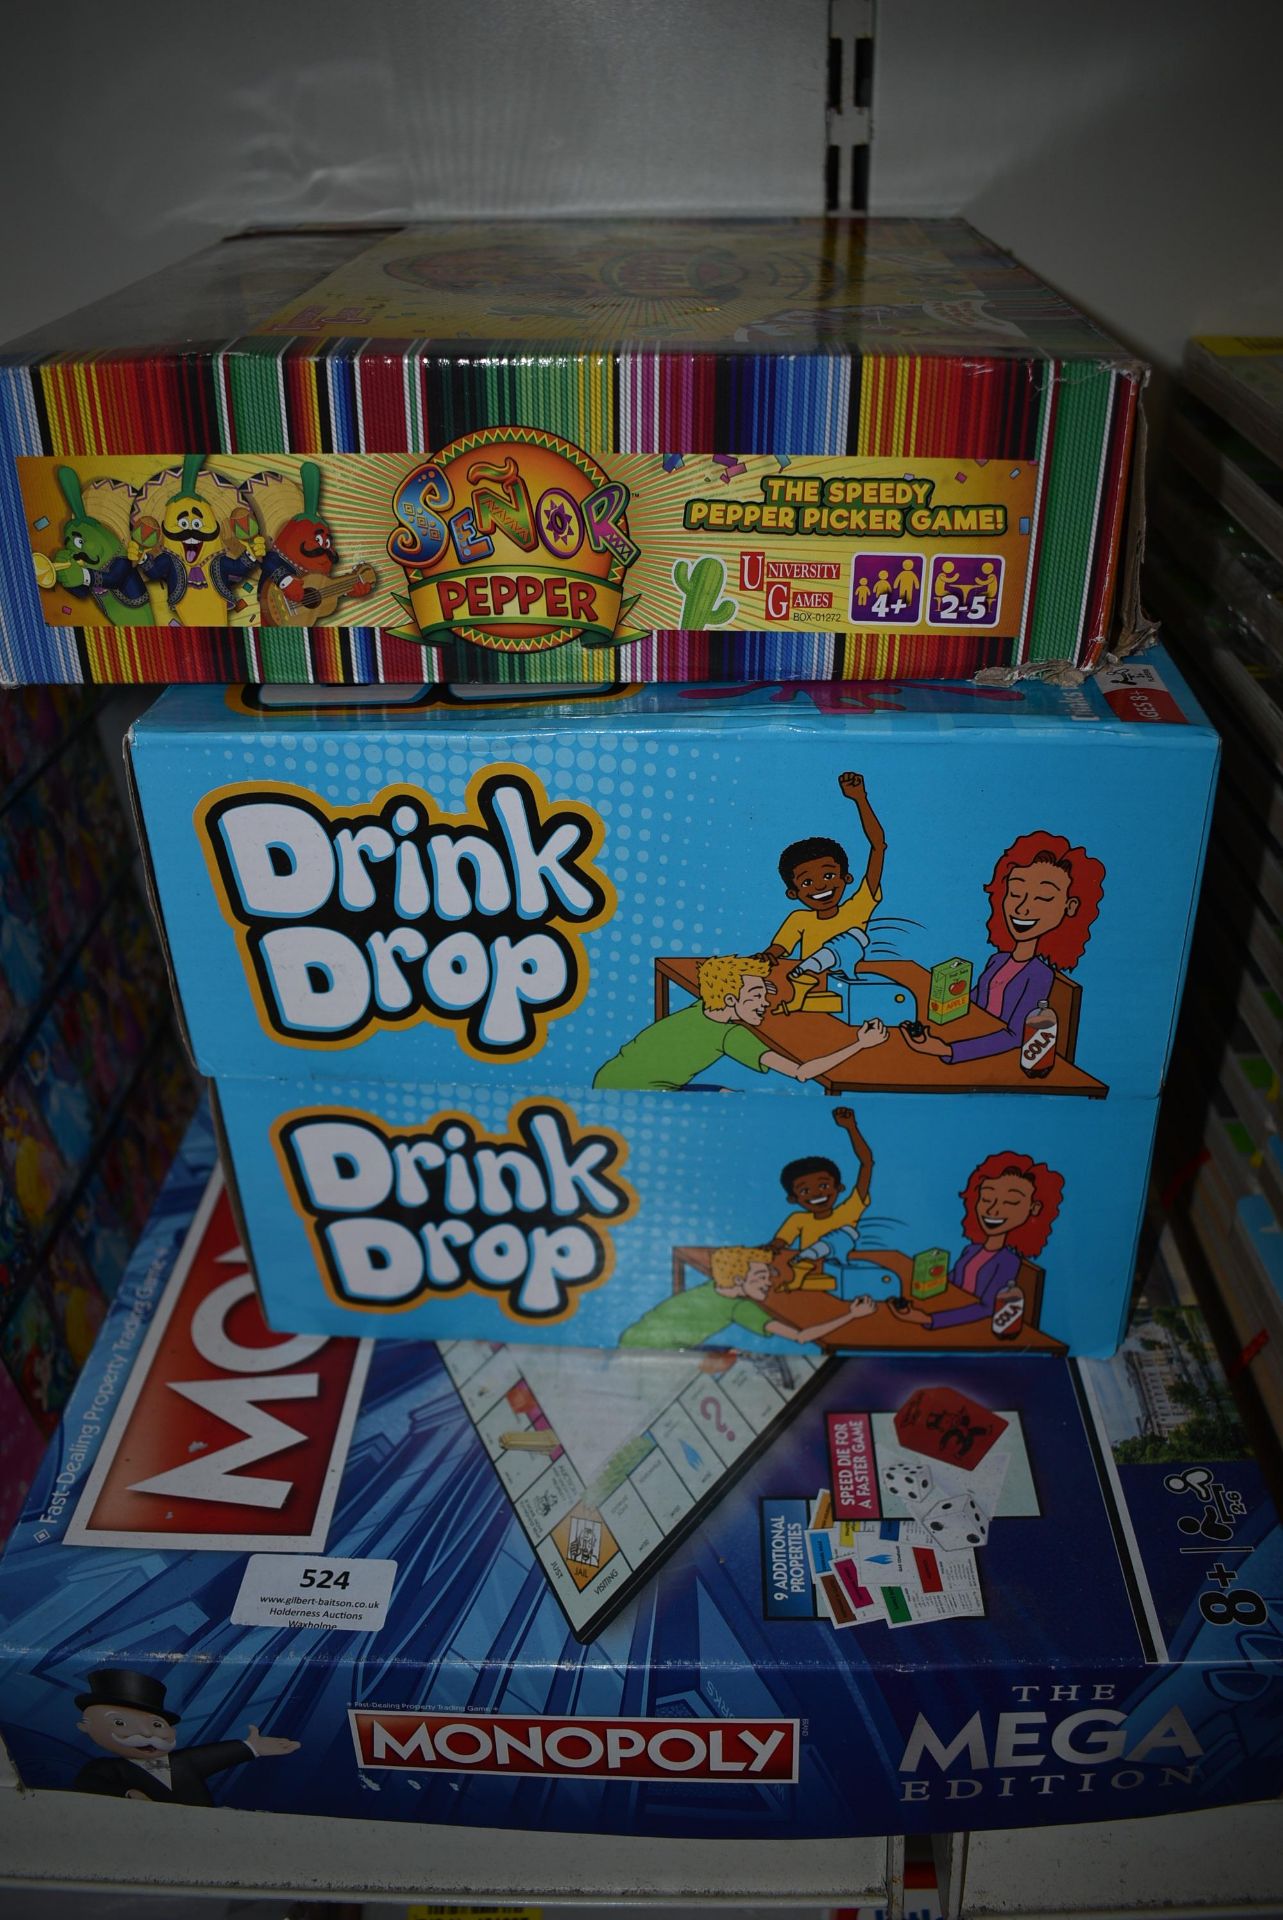 Monopoly, Two Drink Drop Games, and Senor Pepper - Image 8 of 8